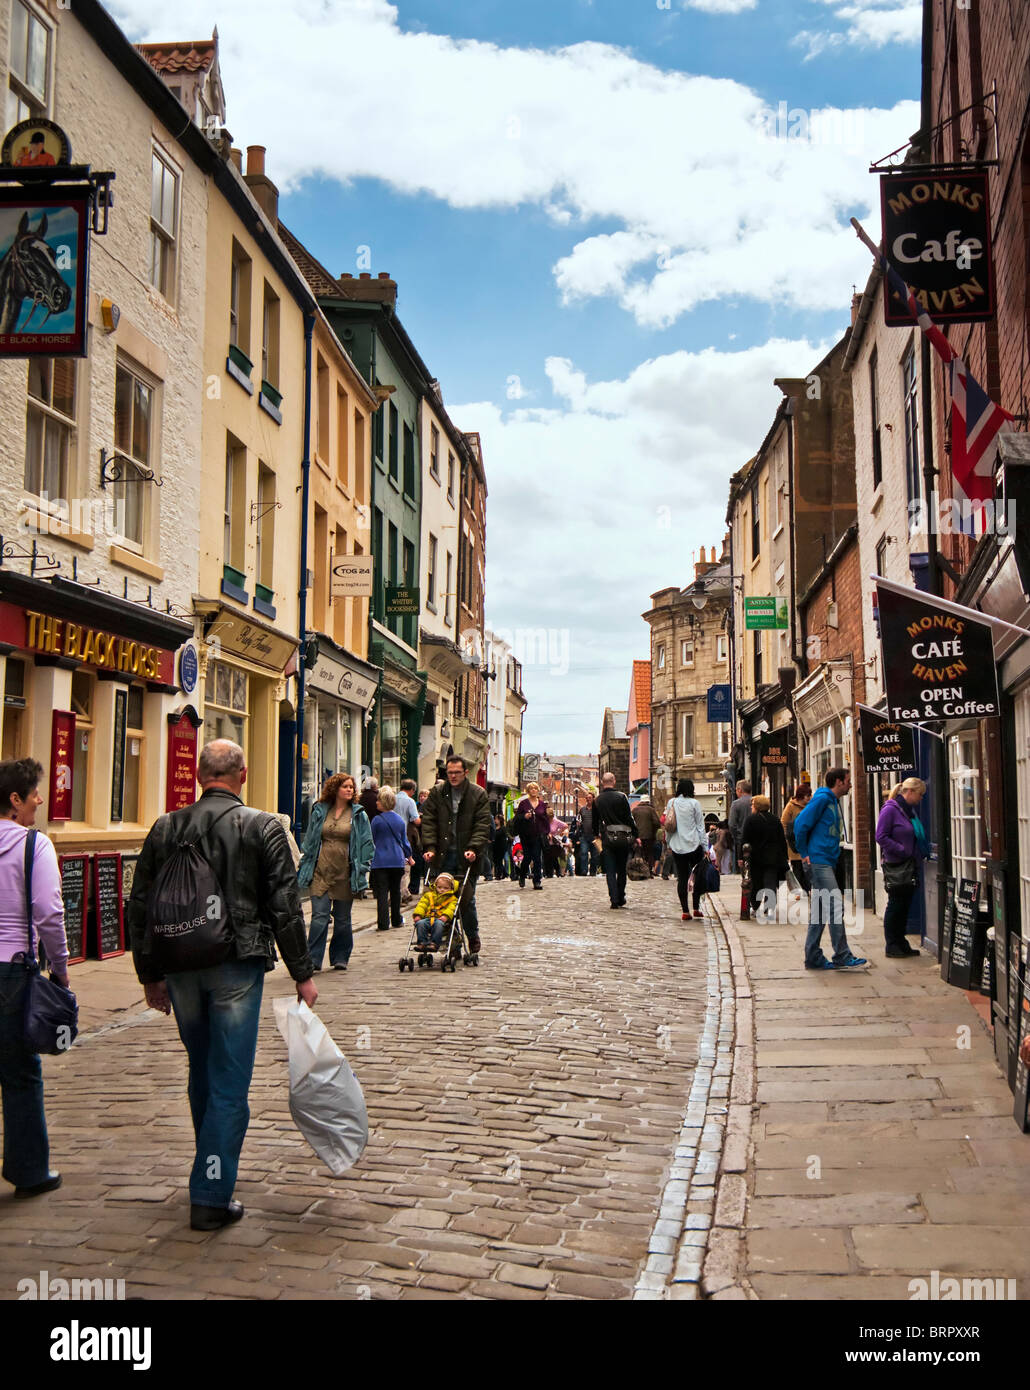 High street con persone shopping a Whitby high street, North Yorkshire, Inghilterra, Regno Unito Foto Stock